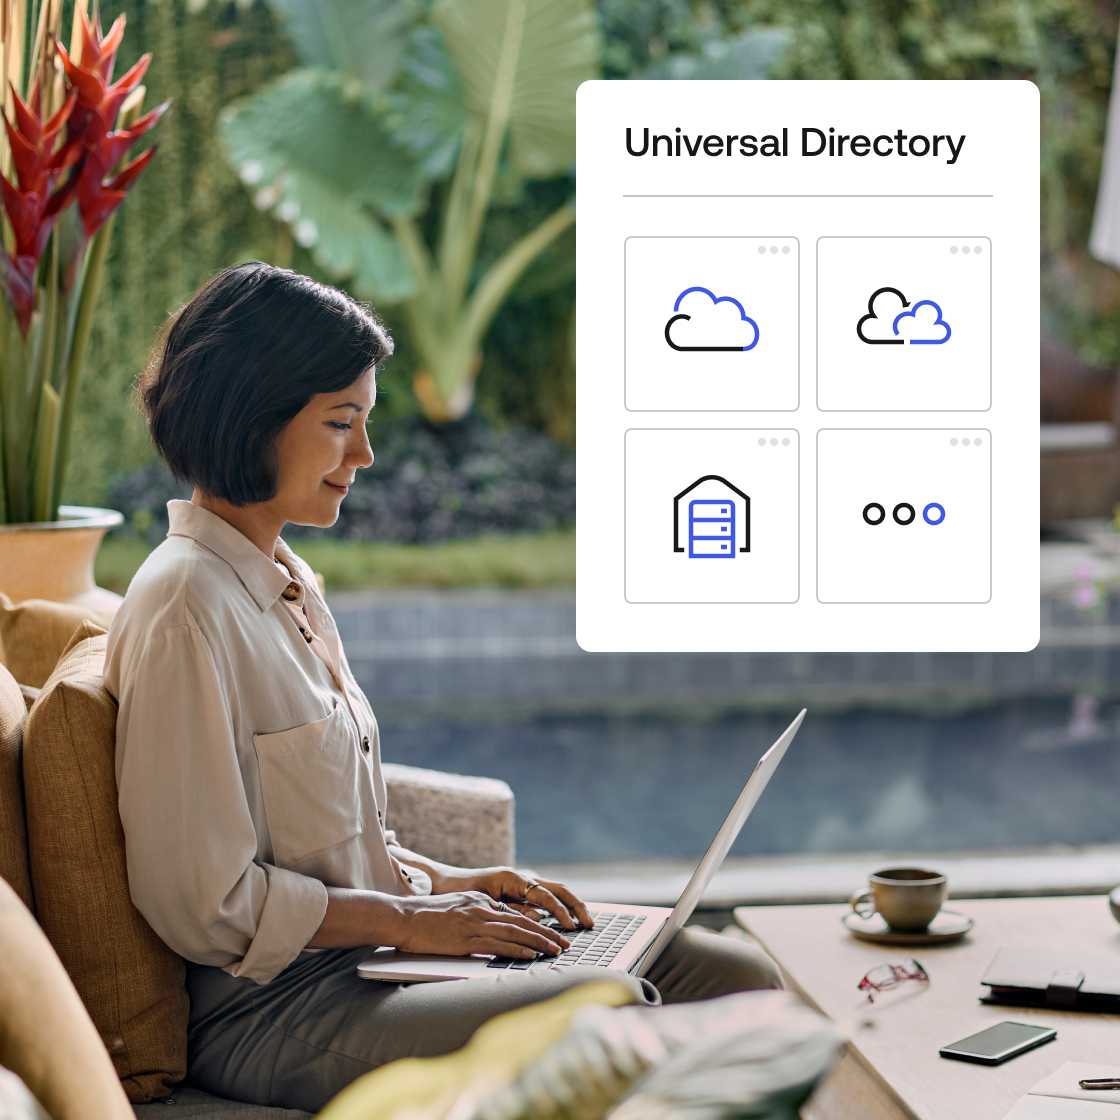 A graphic showing Universal Directory with four icons layered over an image of a woman working on her laptop.